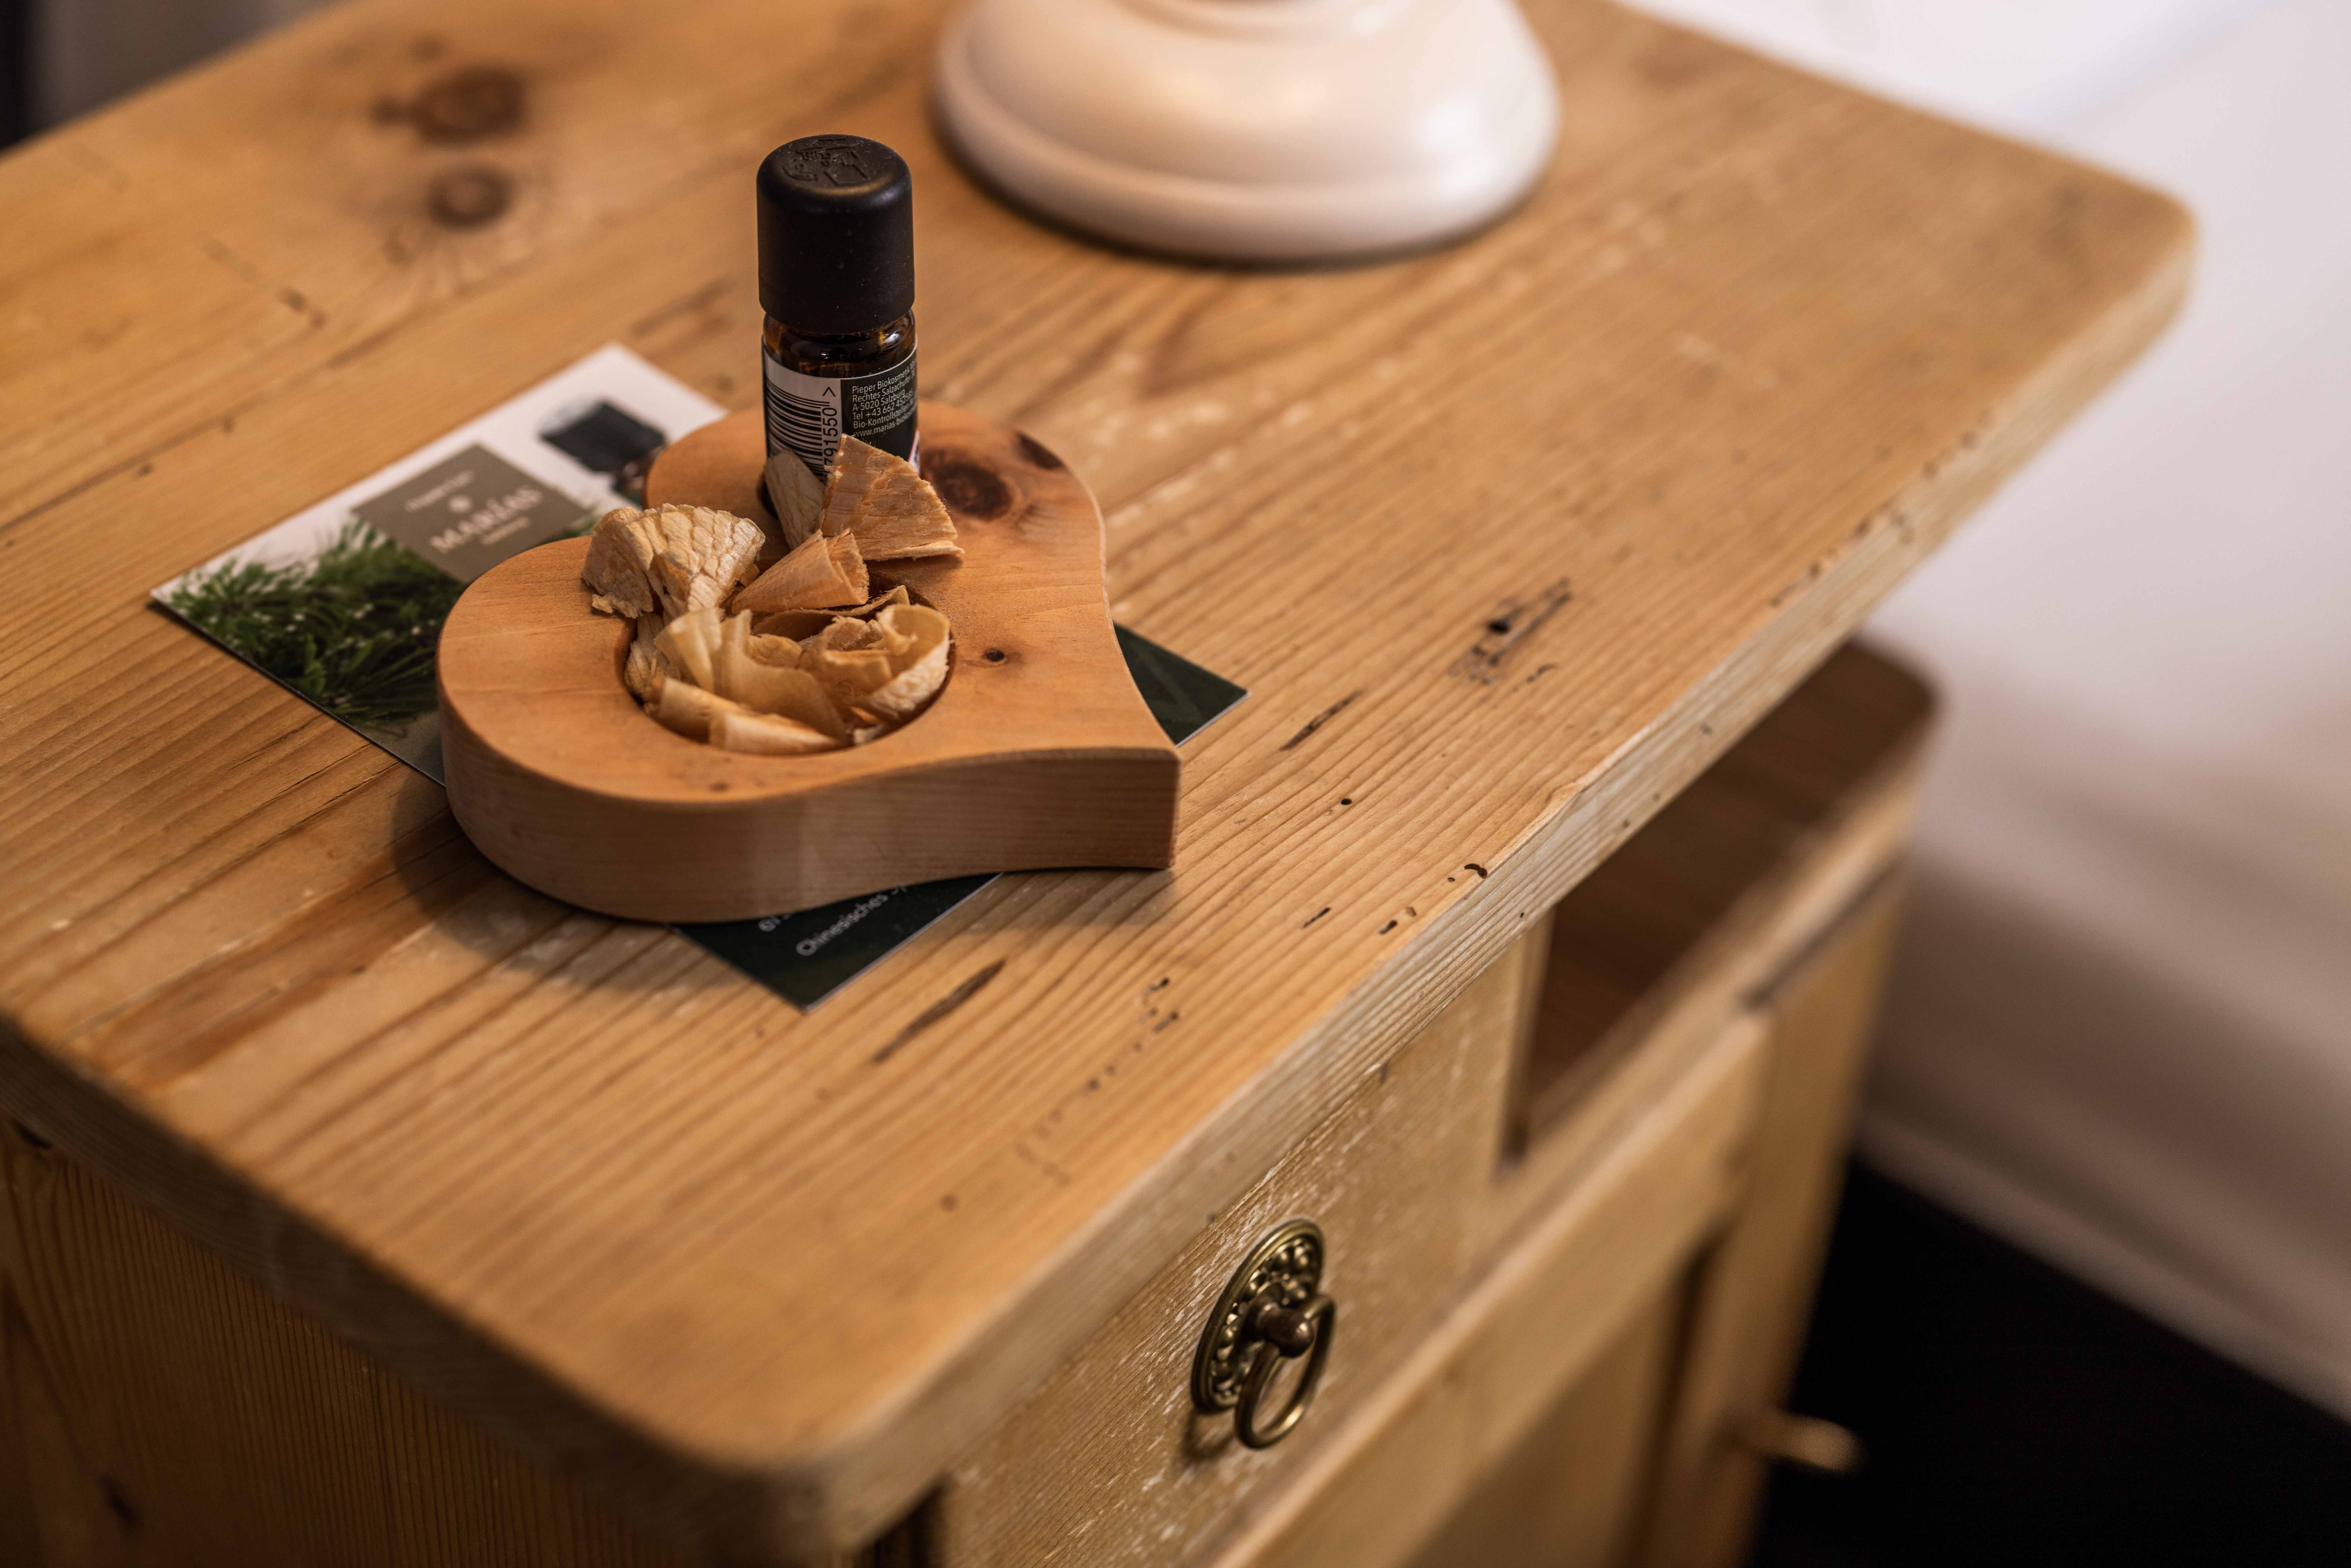 A vial of essential oil next to a scented bowl on a rustic dresser